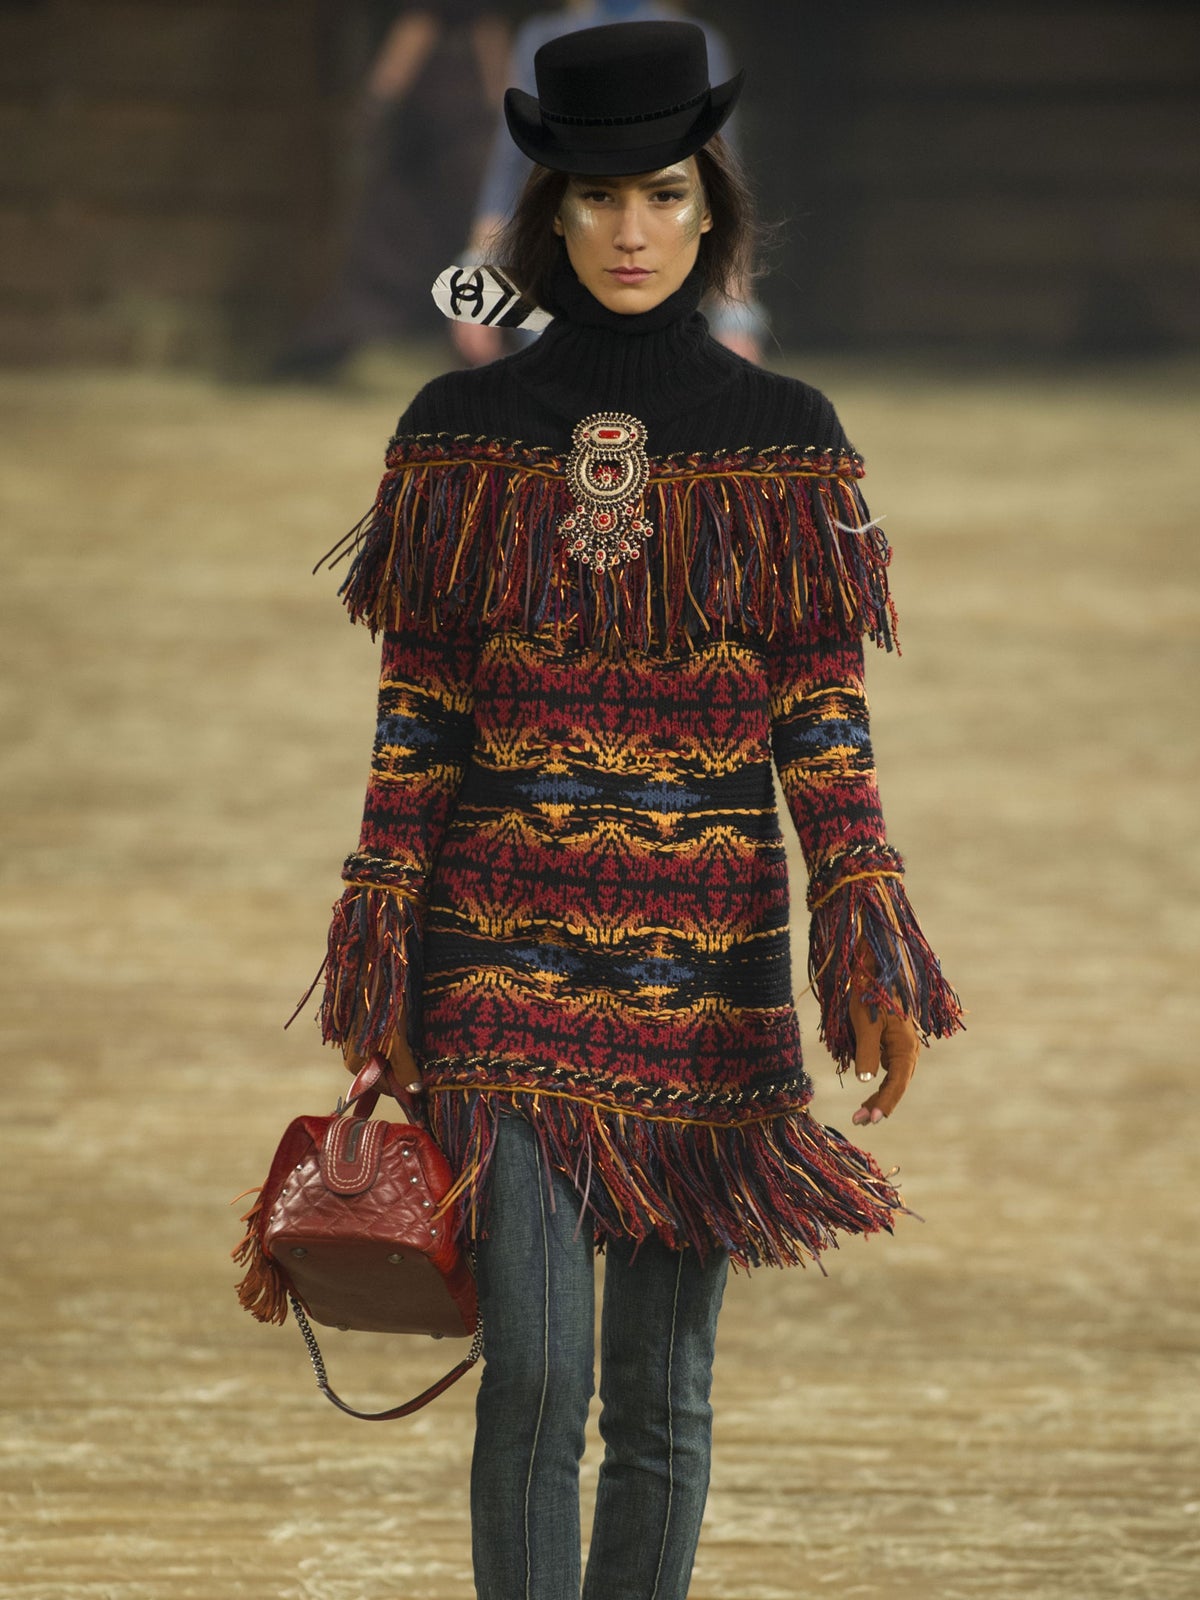 In pictures: Chanel heads to Texas for the Pre-Fall 2014 Metiers d'Art  fashion show in Dallas, The Independent